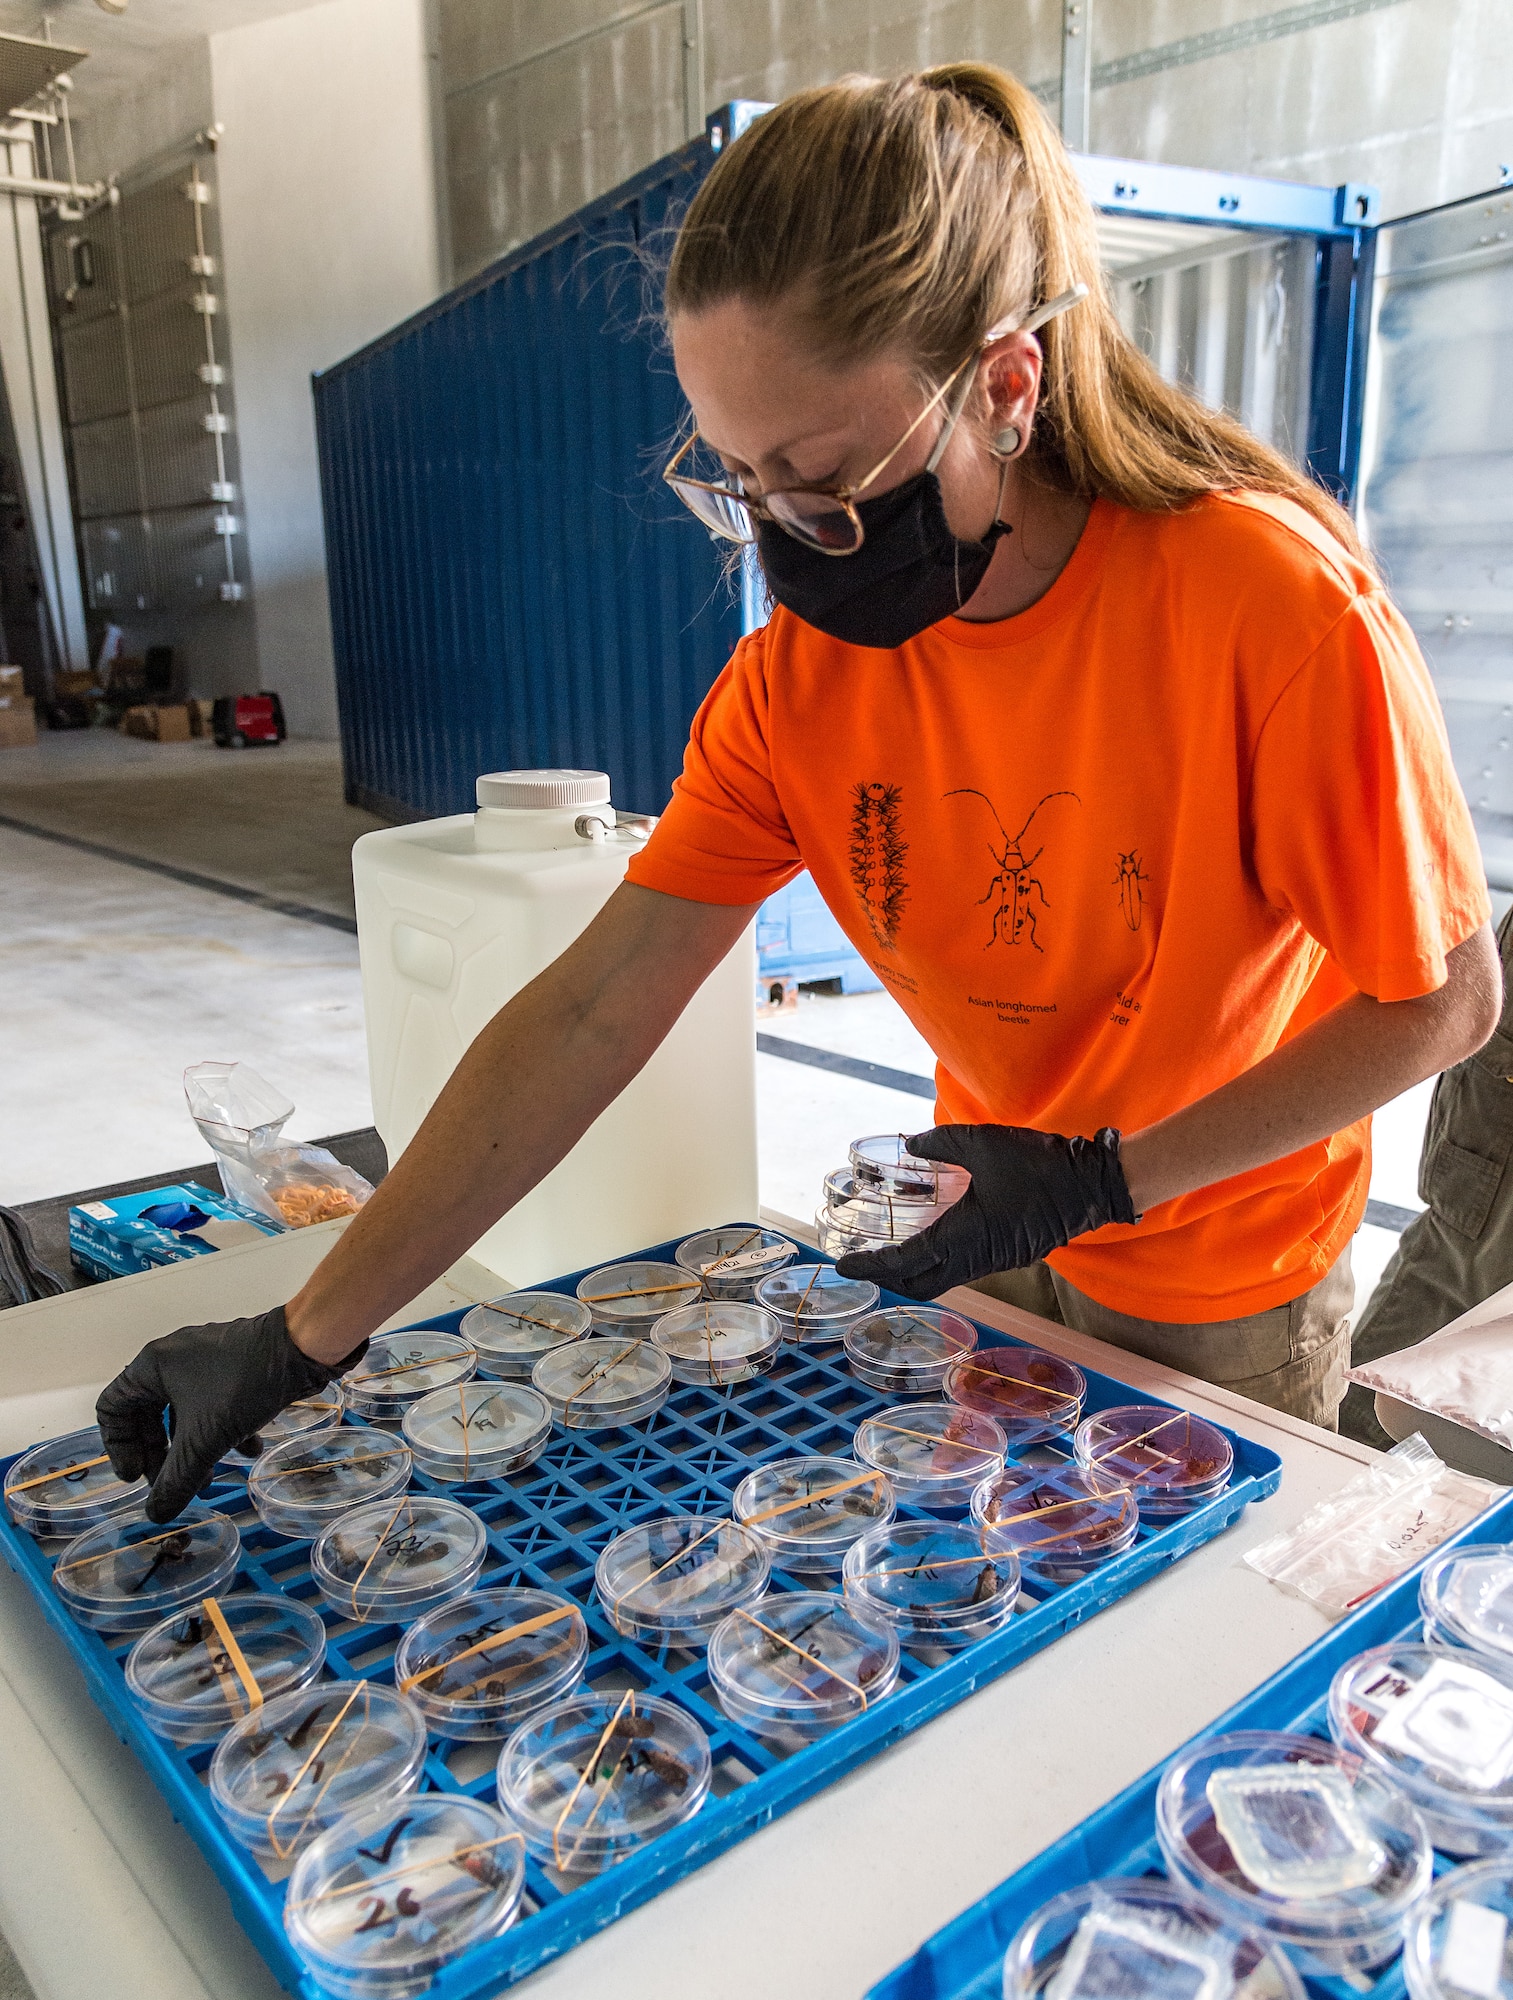 Emily Wallis, U.S. Department of Agriculture biological science laboratory technician, arranges Petri dishes containing Spotted Lanternflies at Dover Air Force Base, Delaware, Aug. 19, 2021. During experiments, the insects were exposed to three different insecticides to test their effectiveness. (U.S. Air Force photo by Roland Balik)